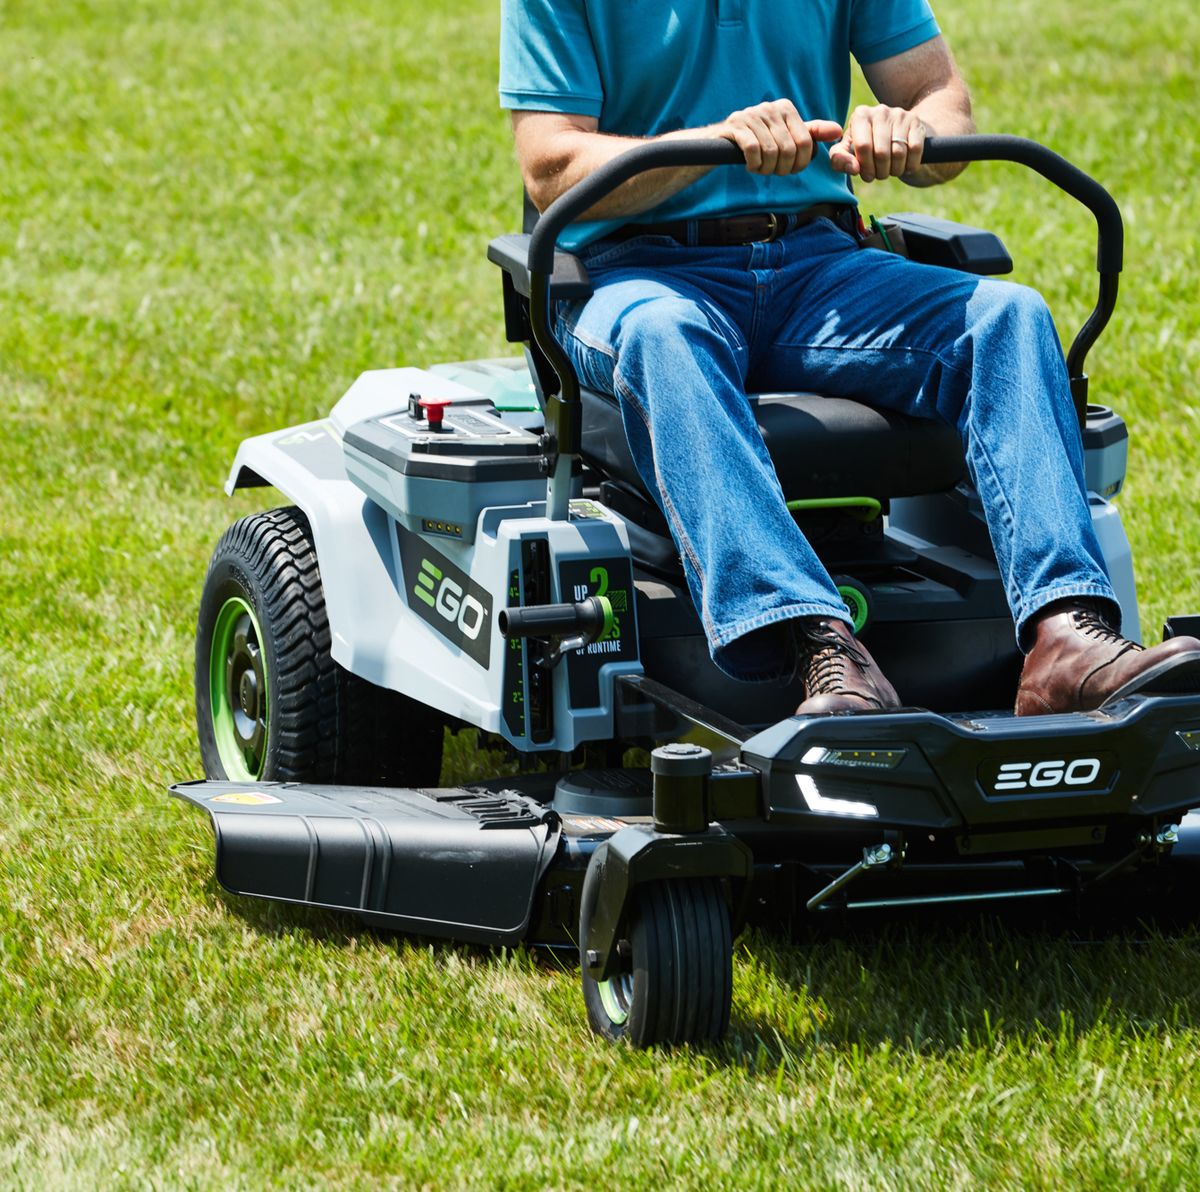 8 electric landscaping tools to transform your yard